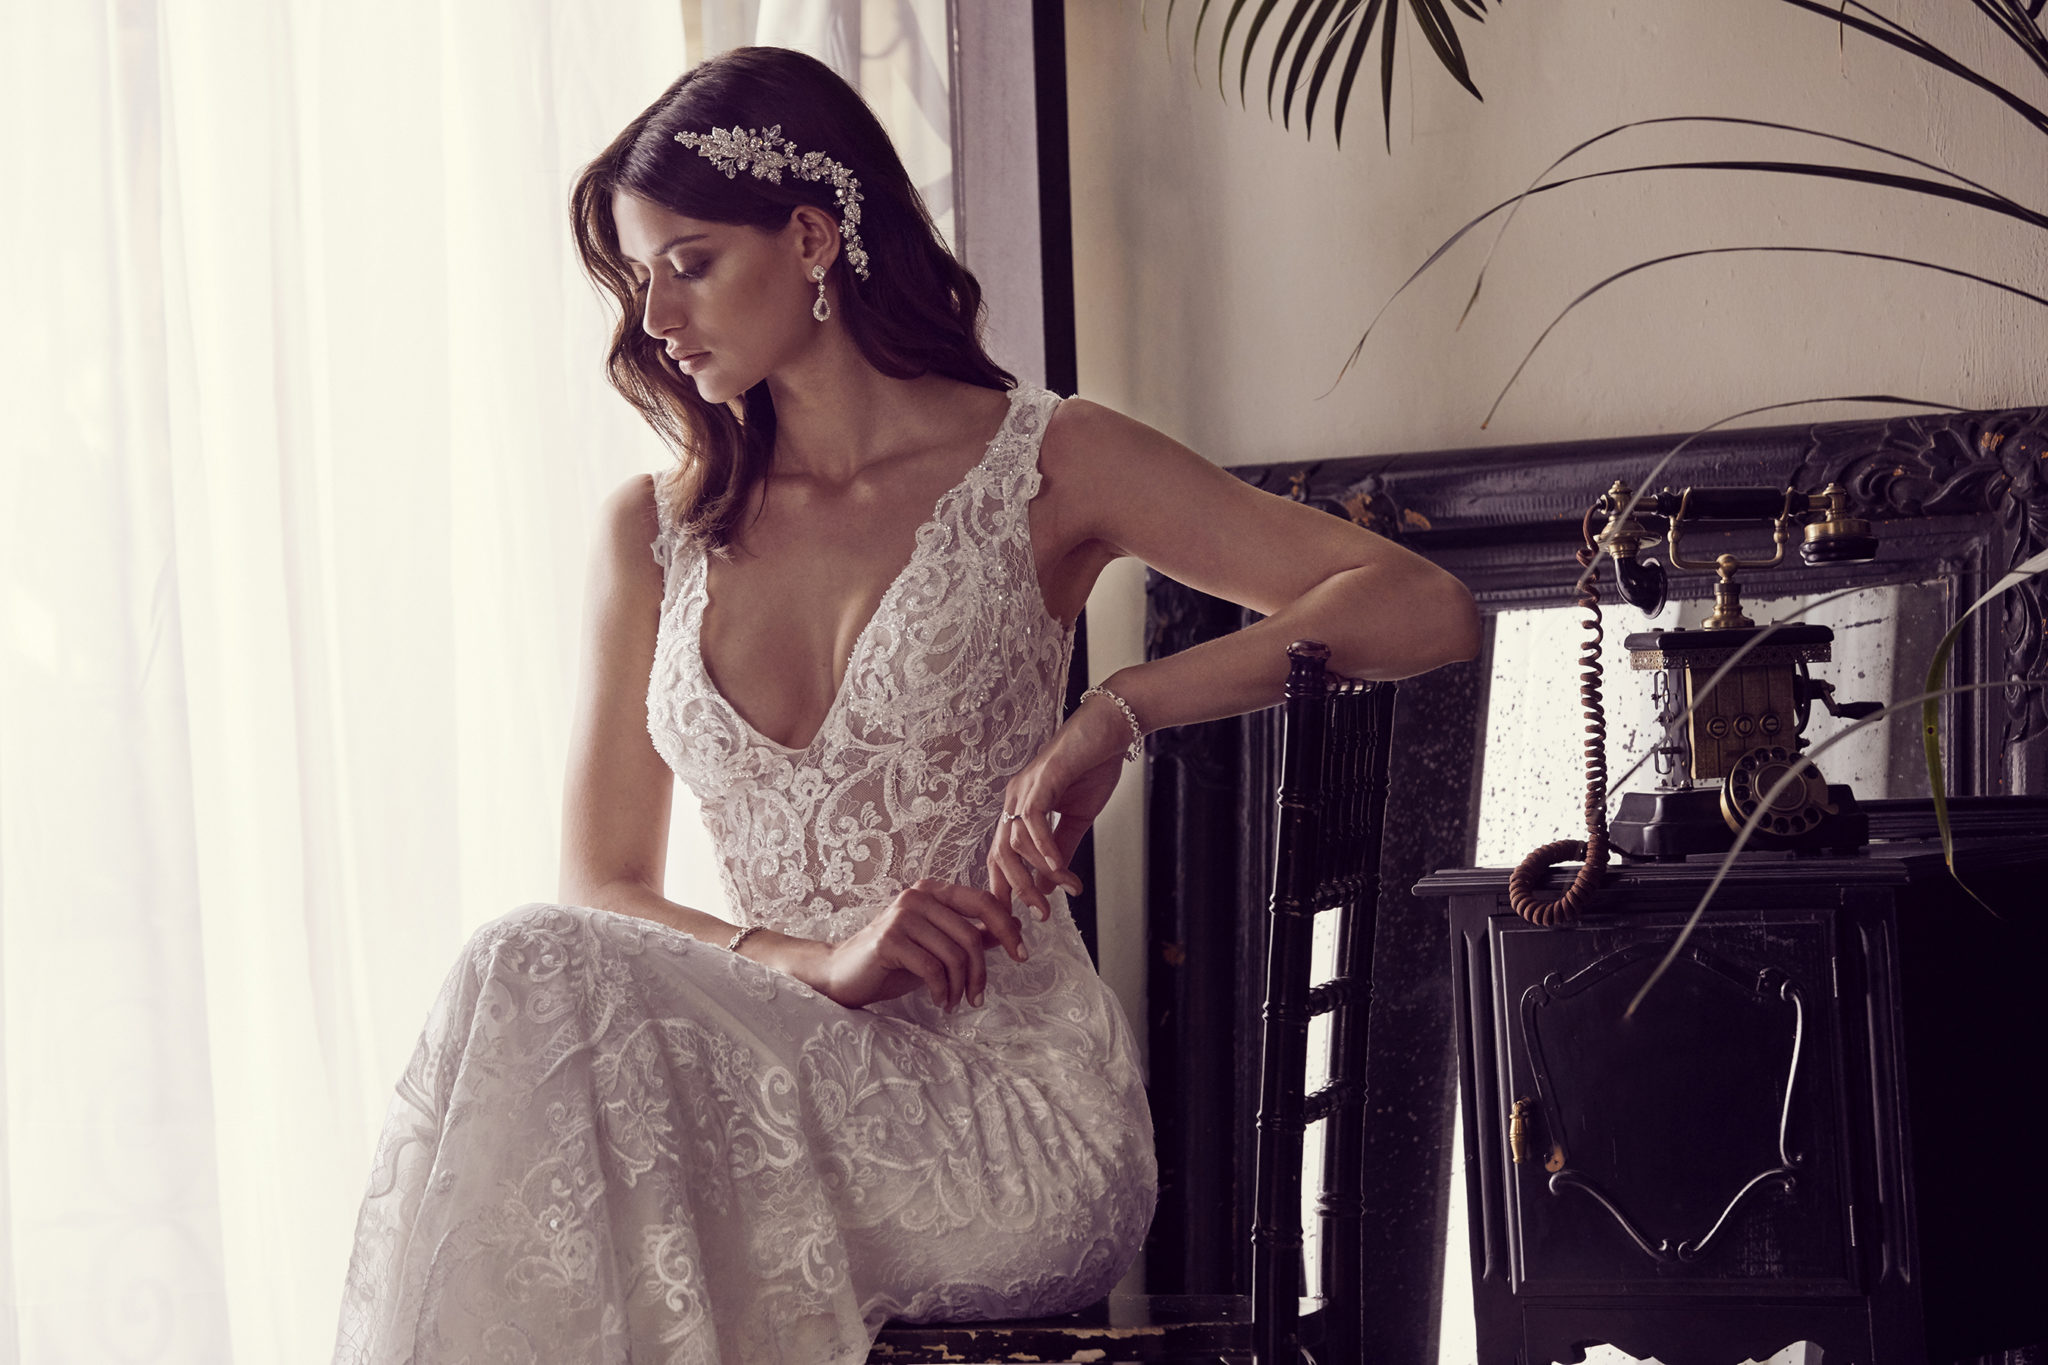 The Fall 2017 Galina Signature Collection. Available exclusively at David's Bridal. See more on the David's Bridal blog - www.davidsbridal.com/blog.